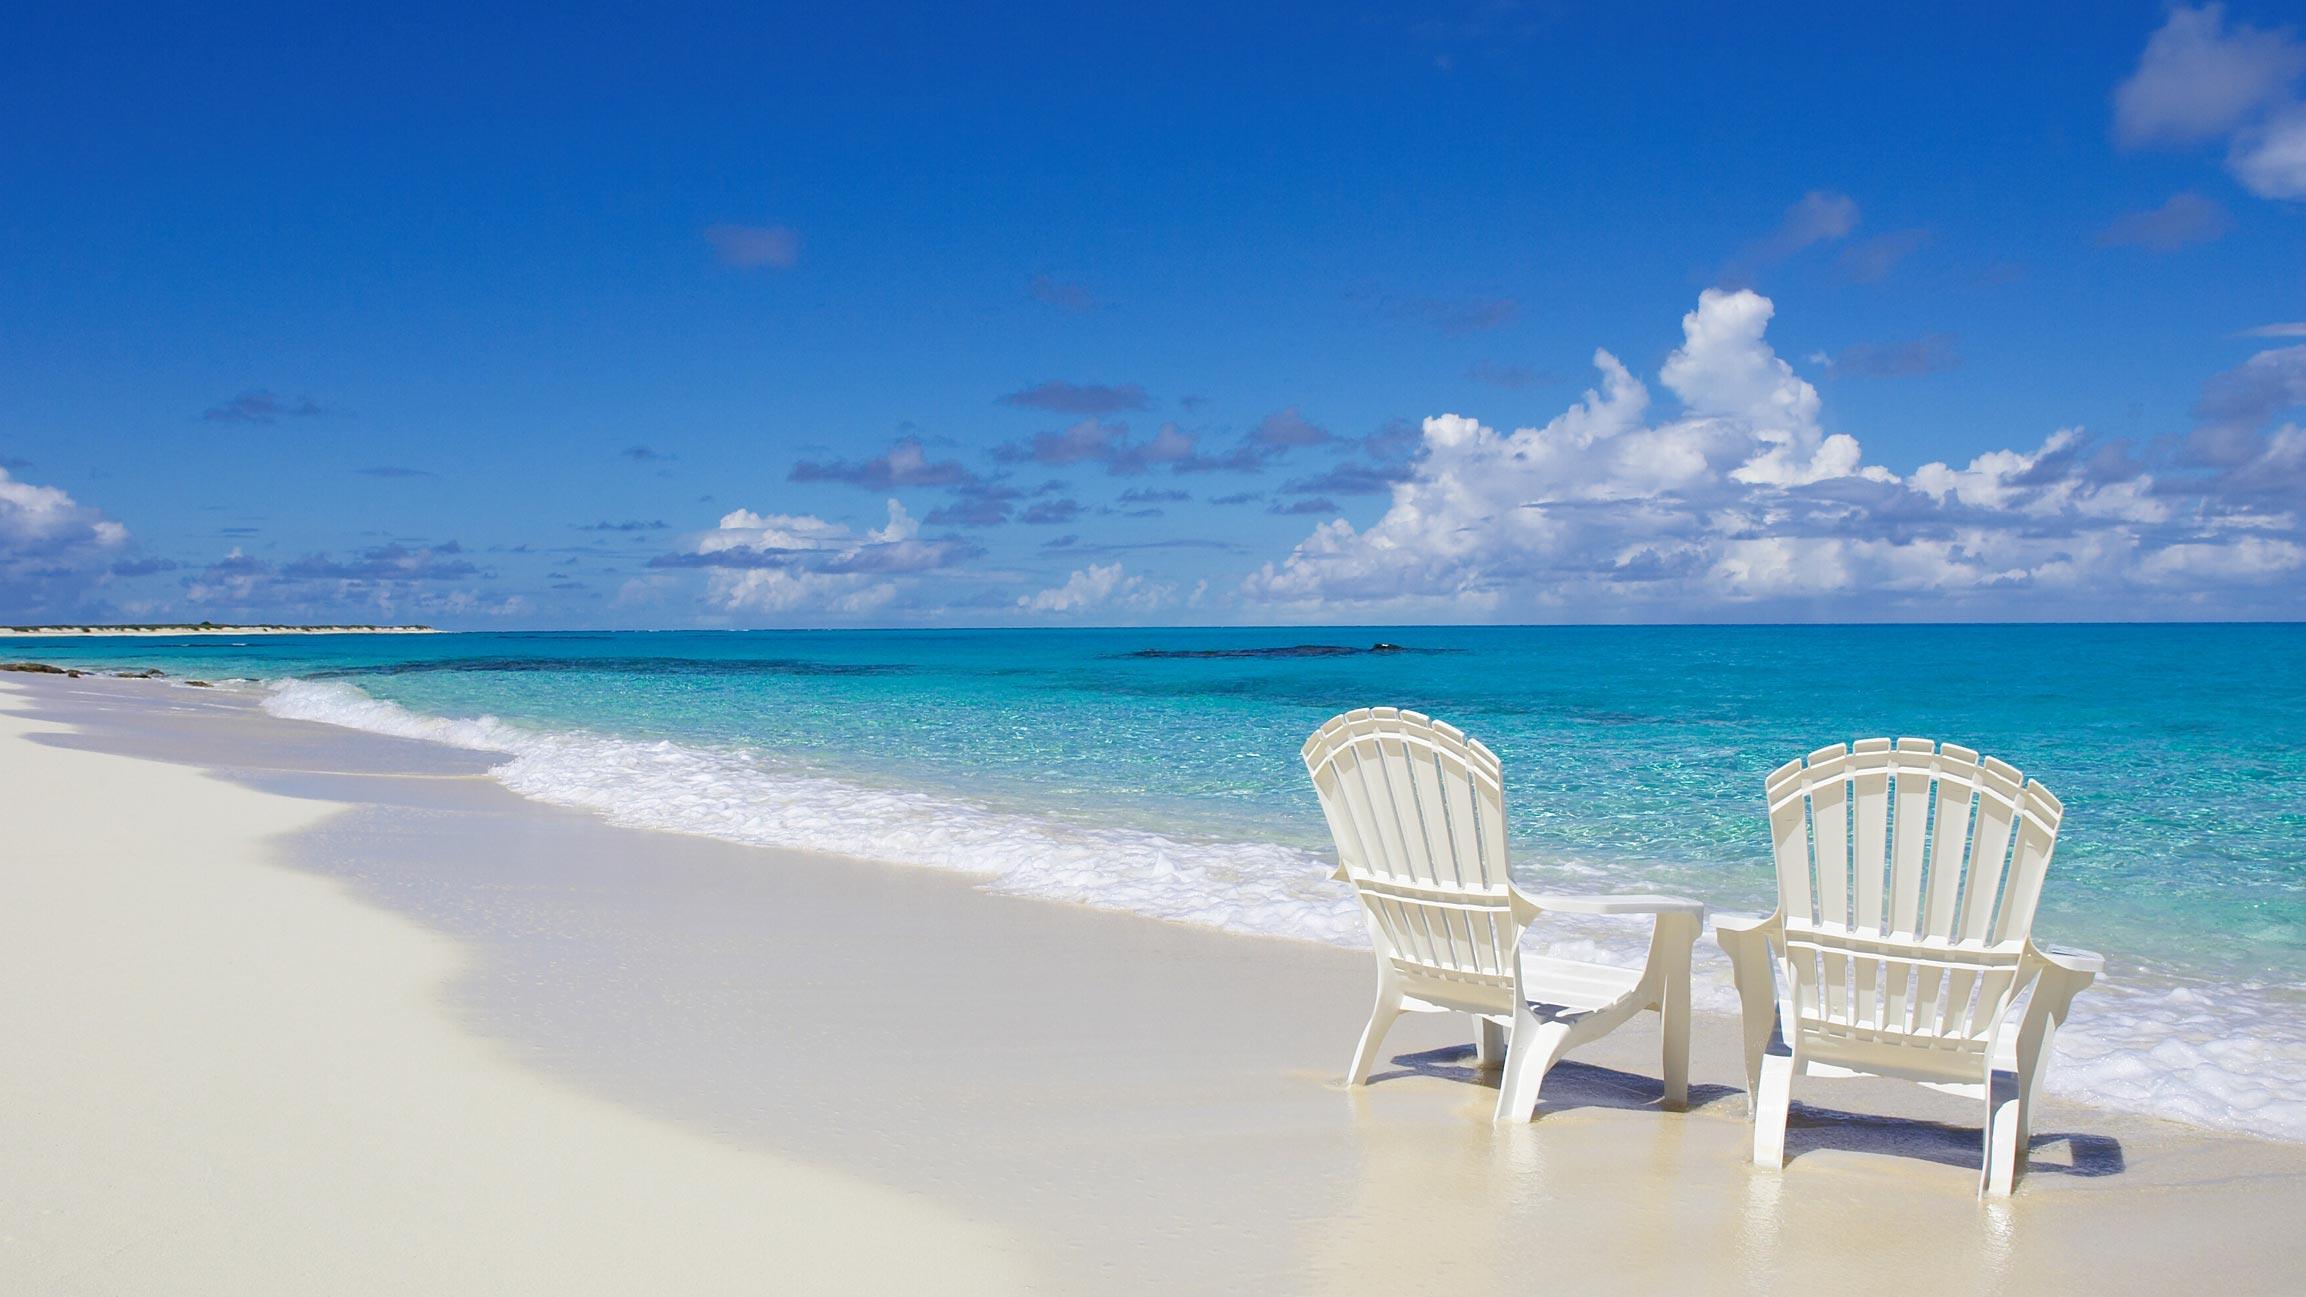 beach on chair wide pics. Daily pics update. HD Wallpaper